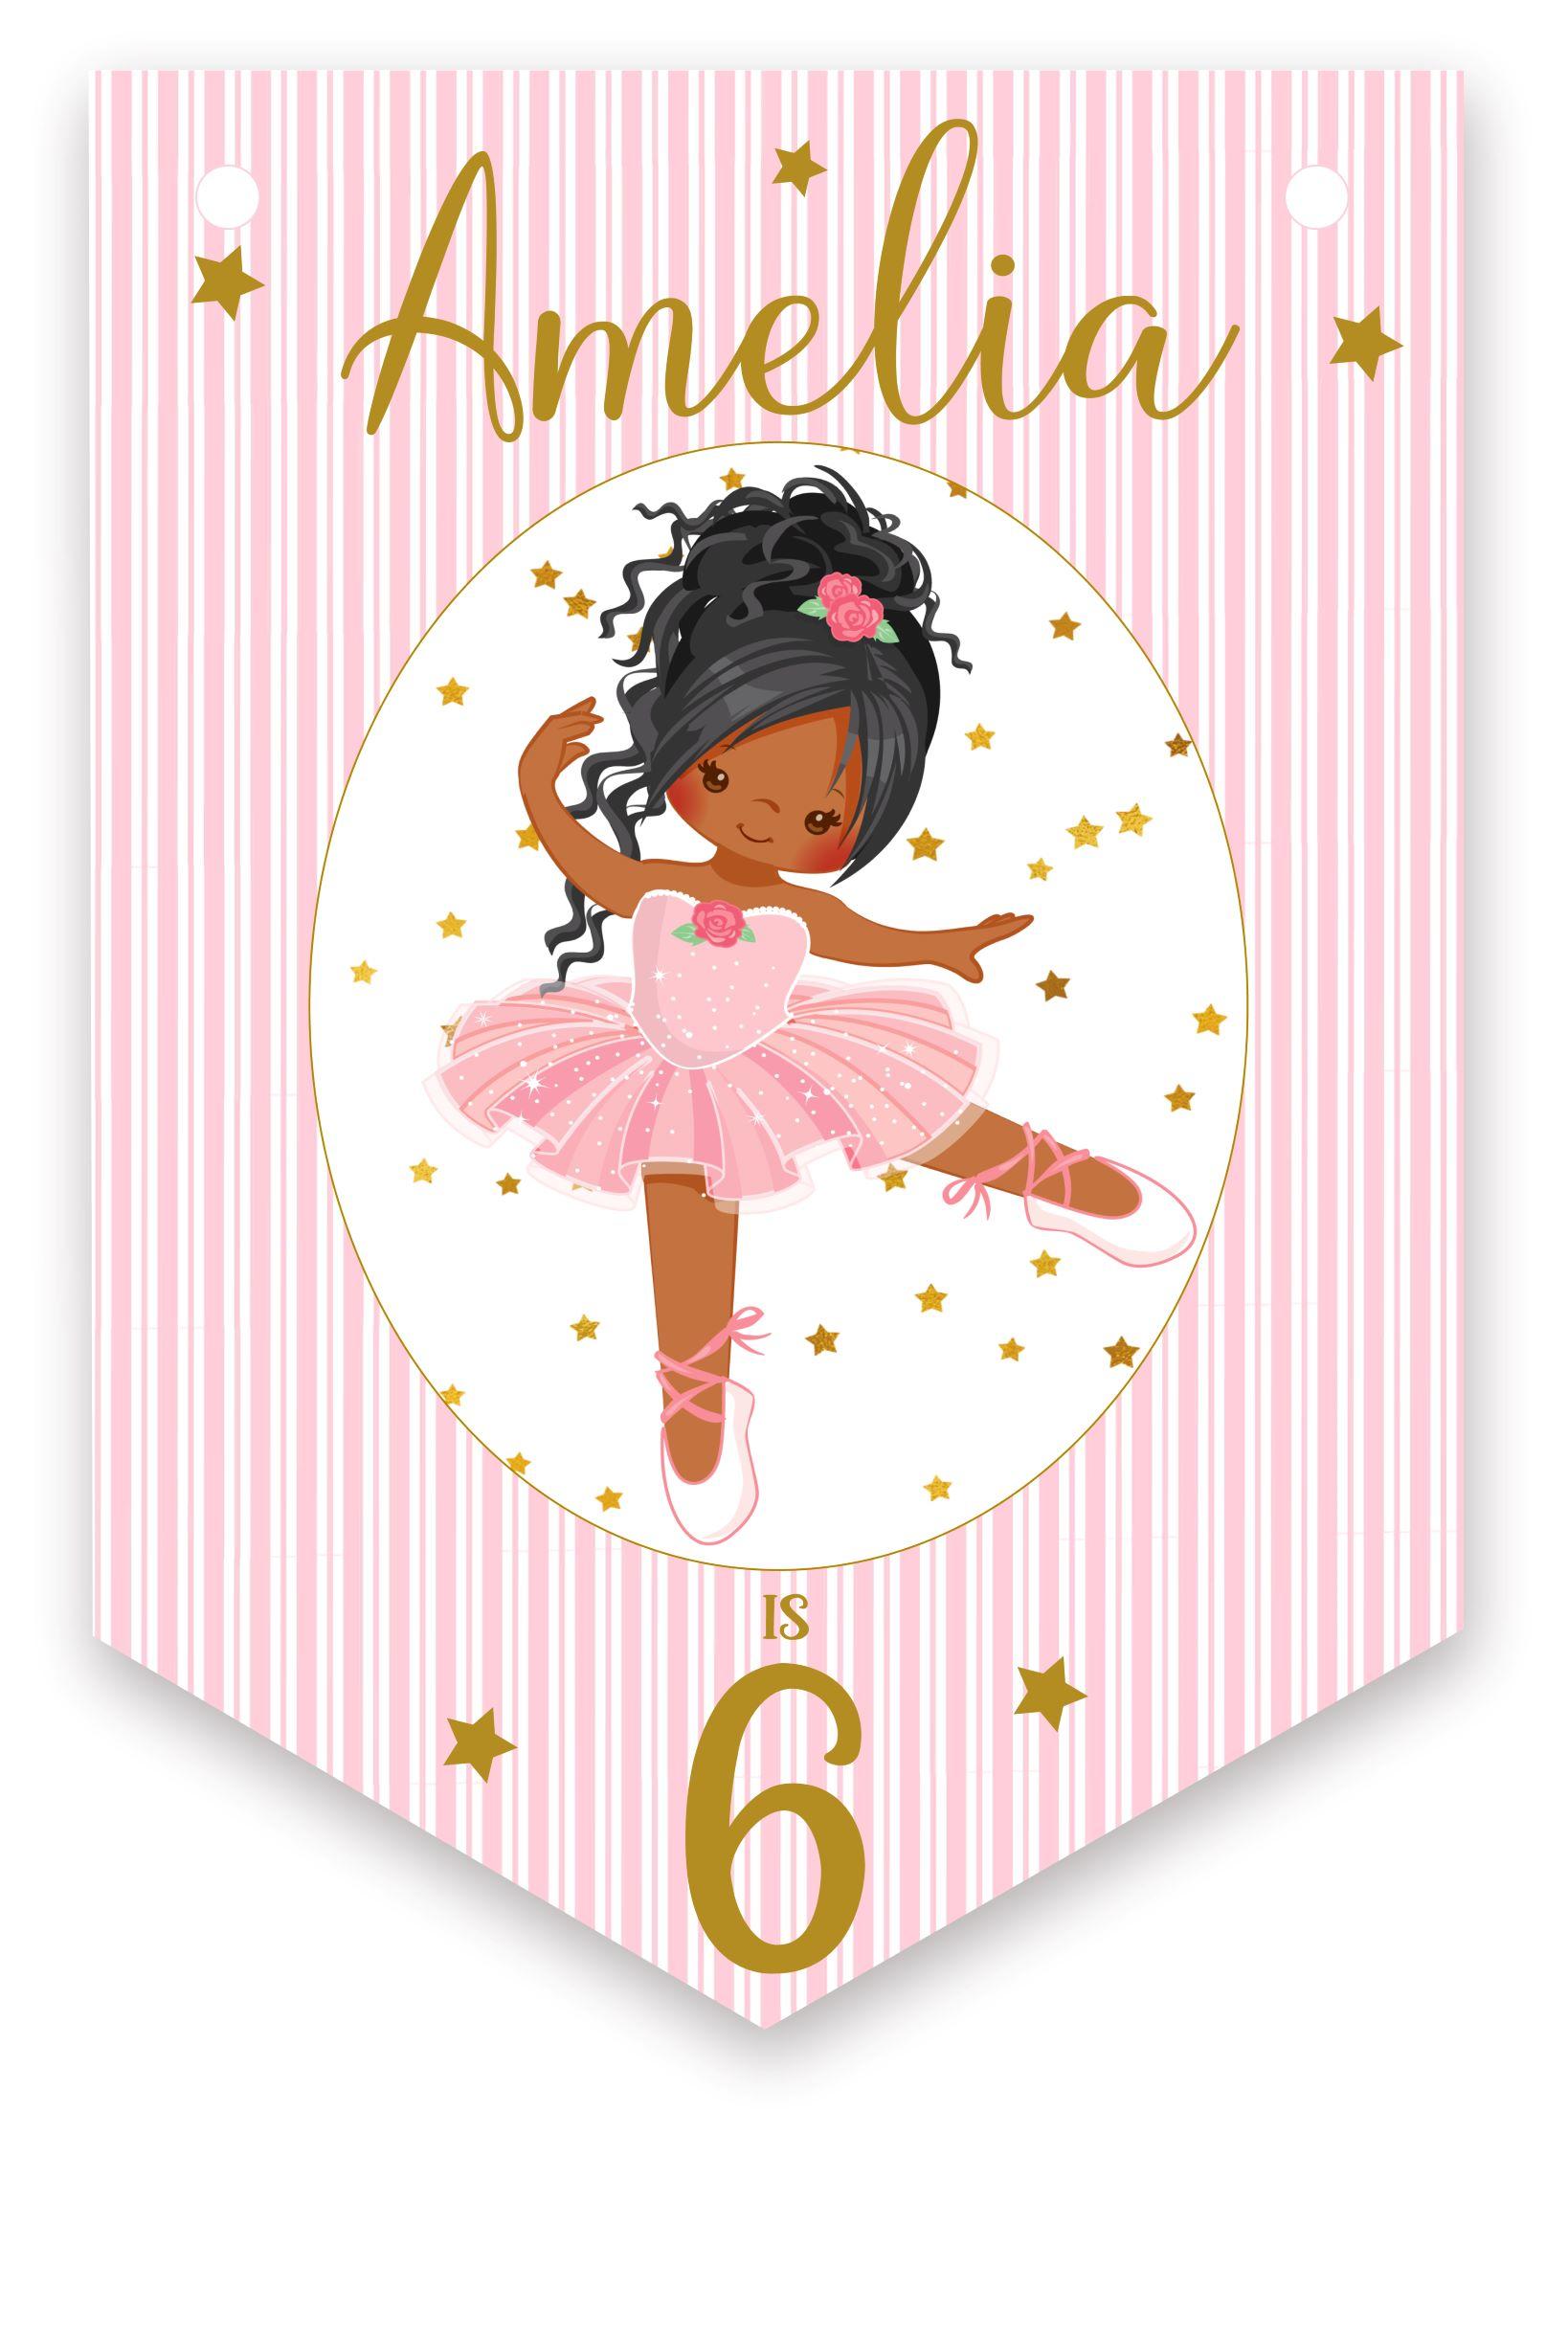 Ballerina Birthday Bunting,Personalised Childrens Birthday Party Banner,Garland,Choice of Hair Colour